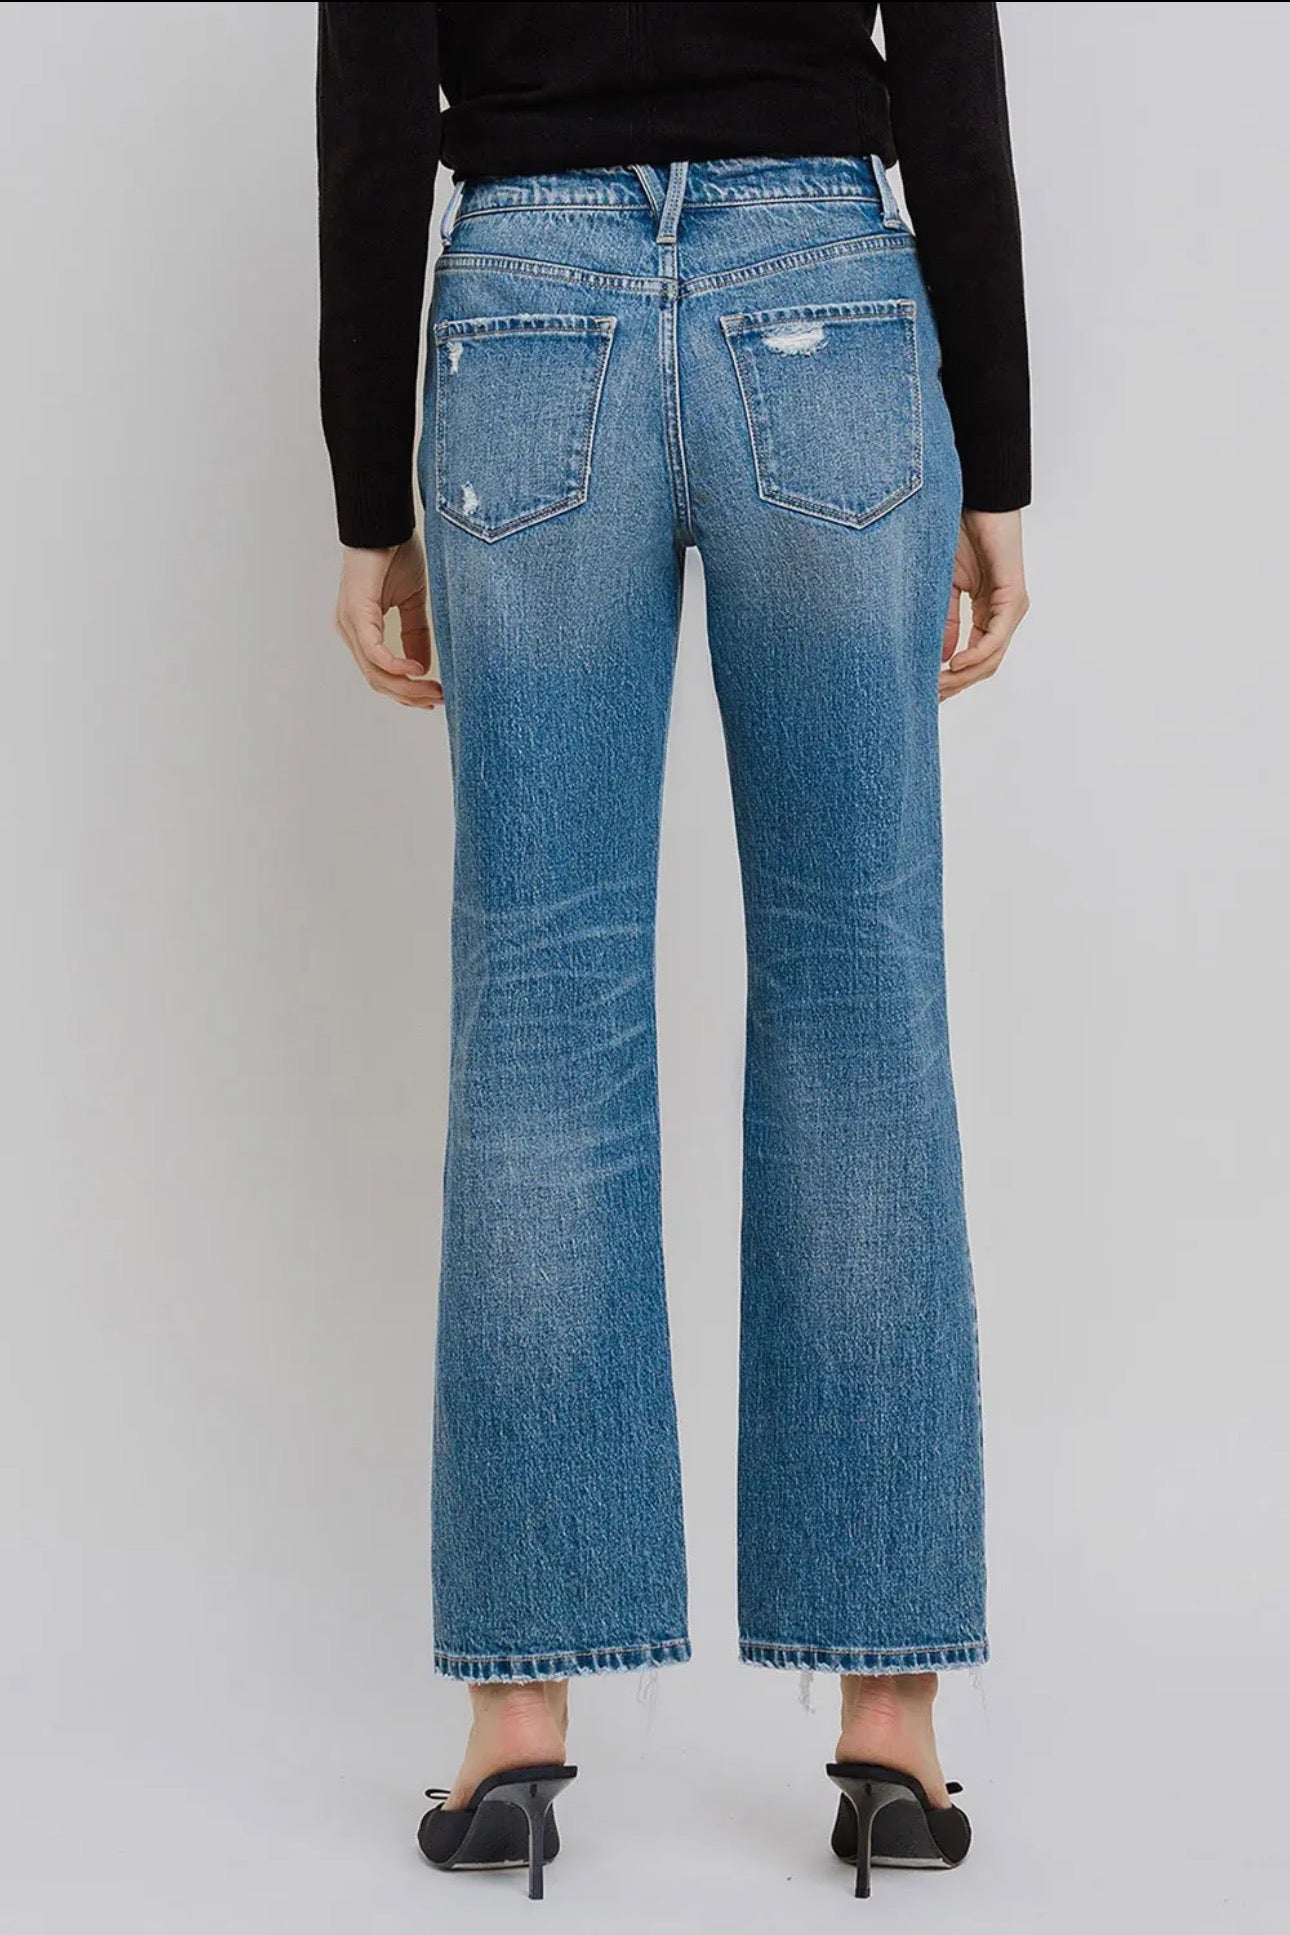 The 90s BLOSSOM JEANS